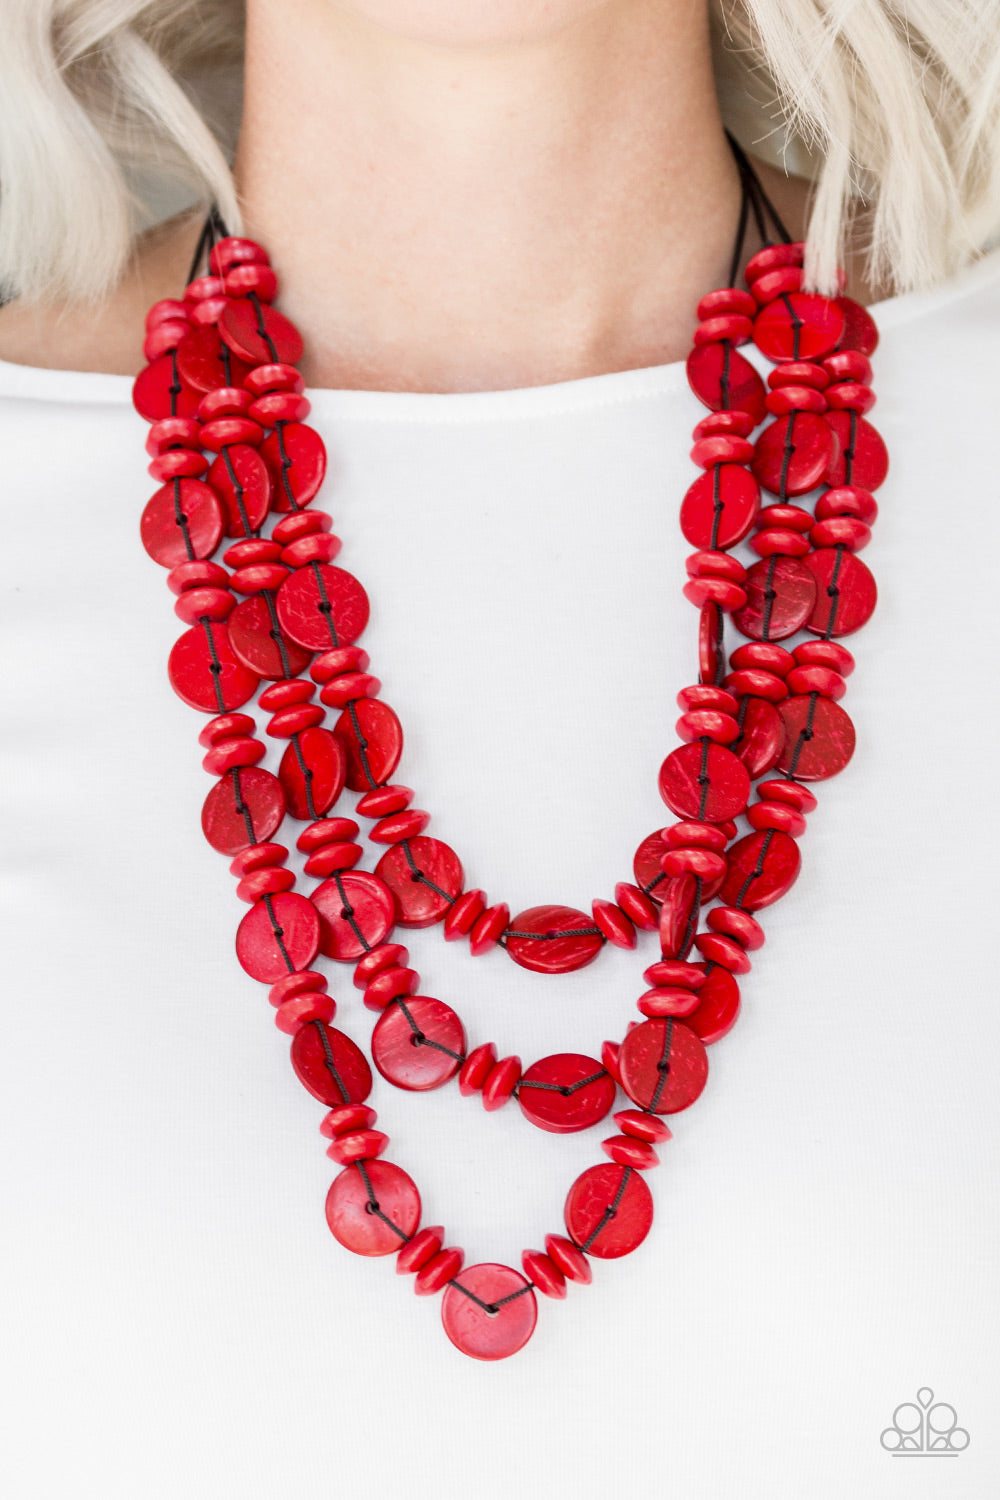 Barbados Bopper - Red Wood Necklace